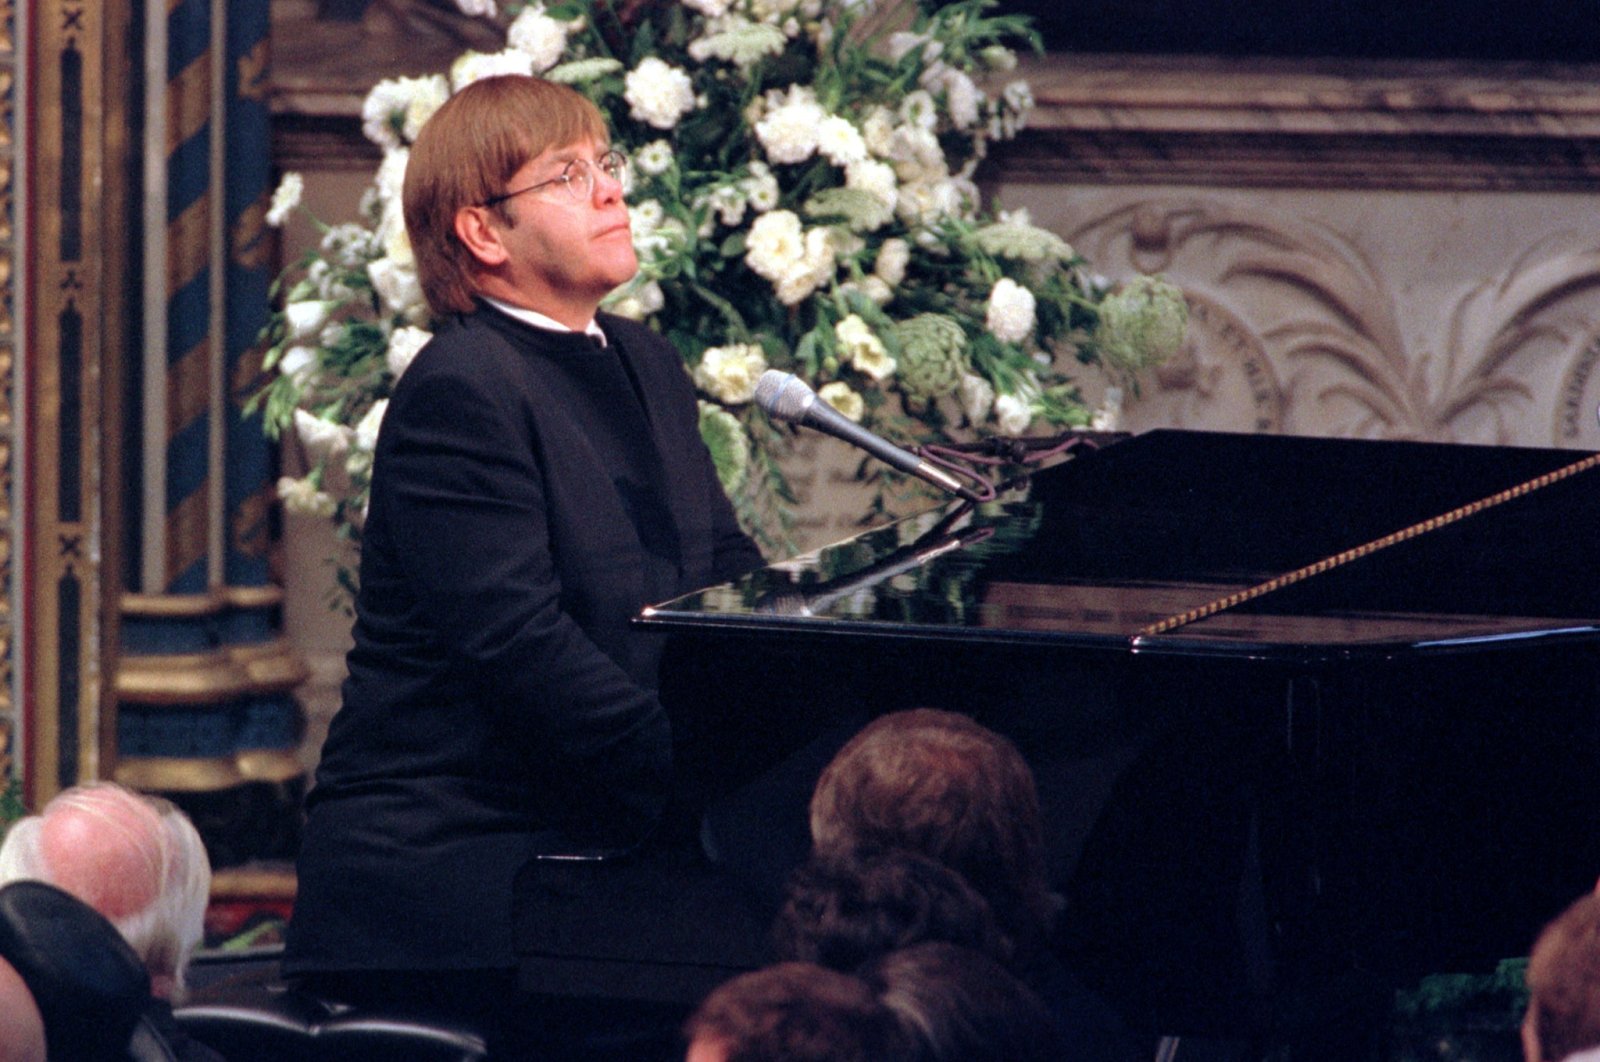 Pop singer Elton John plays a specially re-written version of his classic &quot;Candle in the Wind&quot; during the funeral service for Diana, Princess of Wales, at Westminster Abbey, Sept. 6, 1997. (REUTERS)